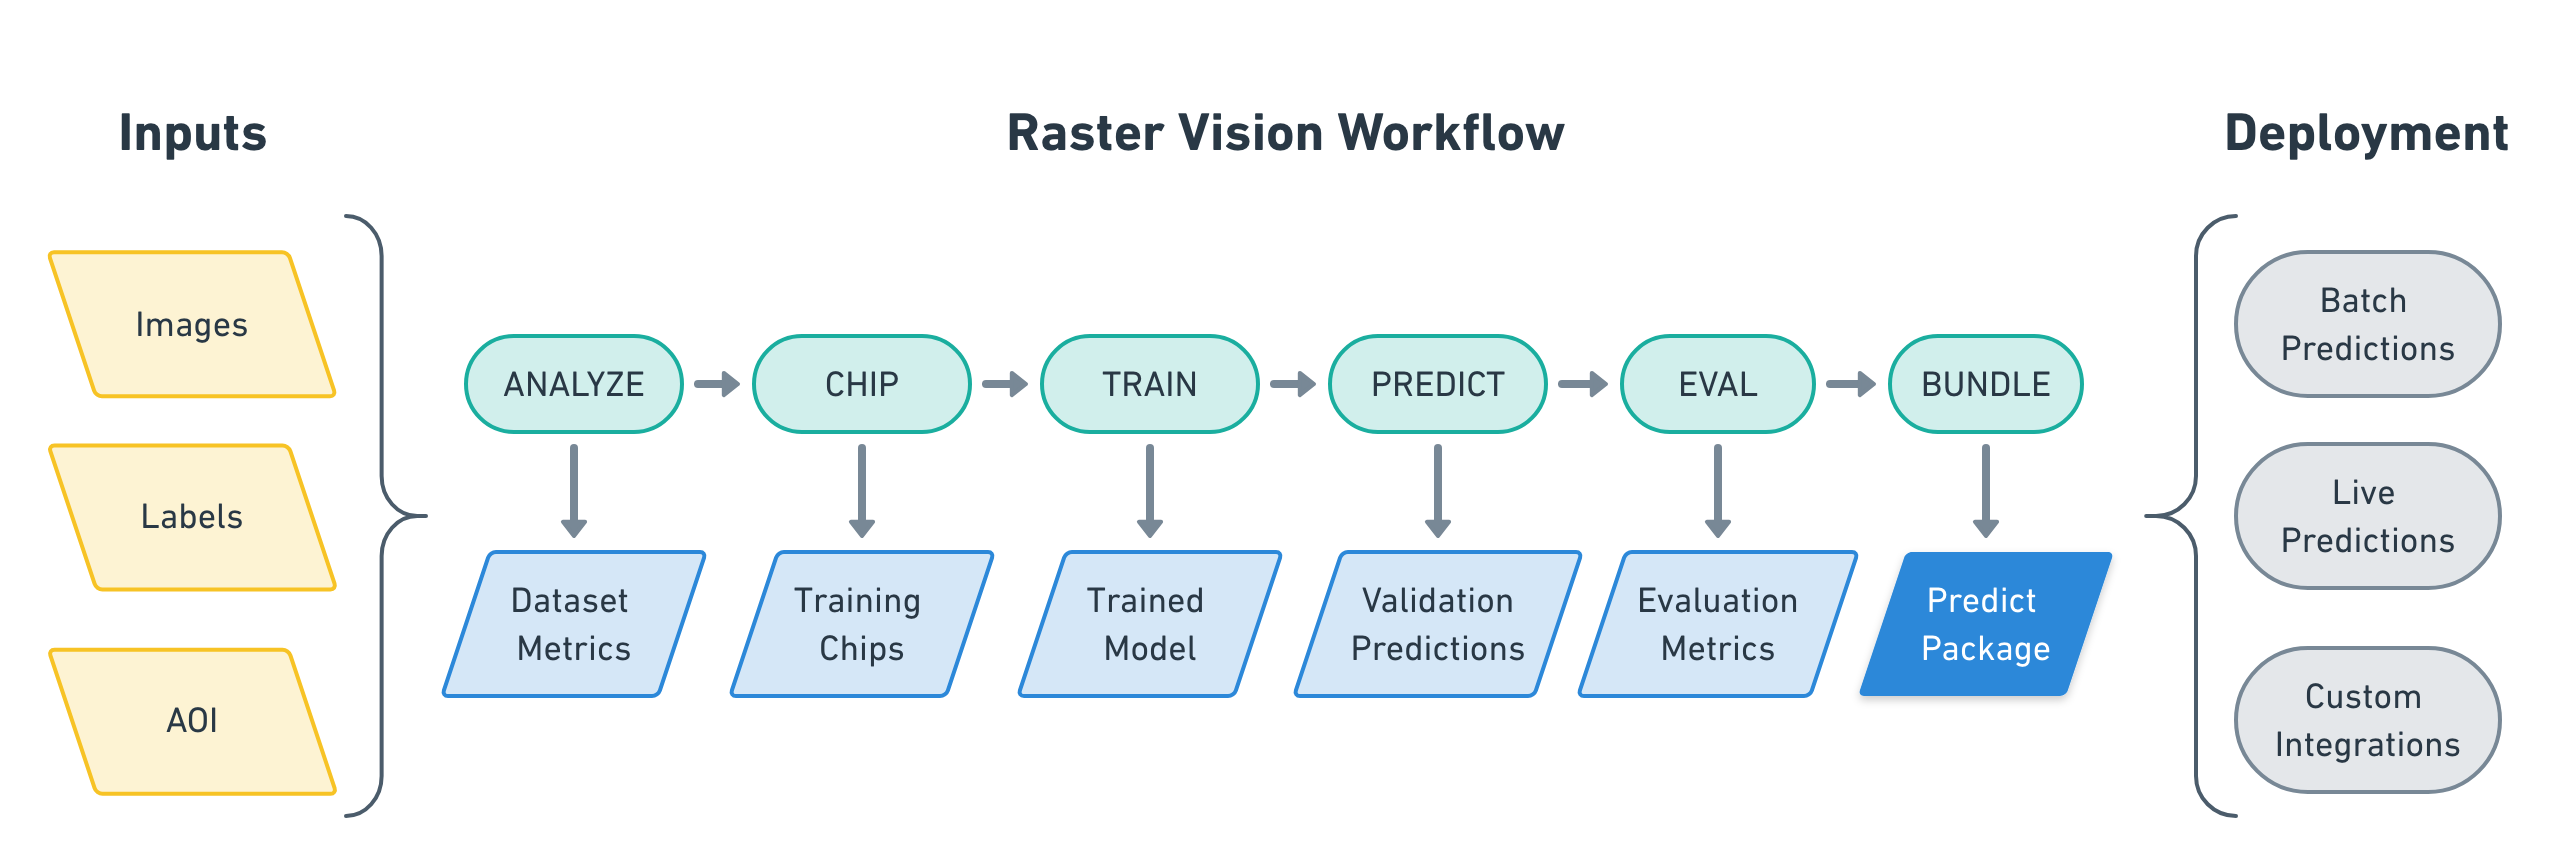 ../_images/overview-raster-vision-pipeline.png